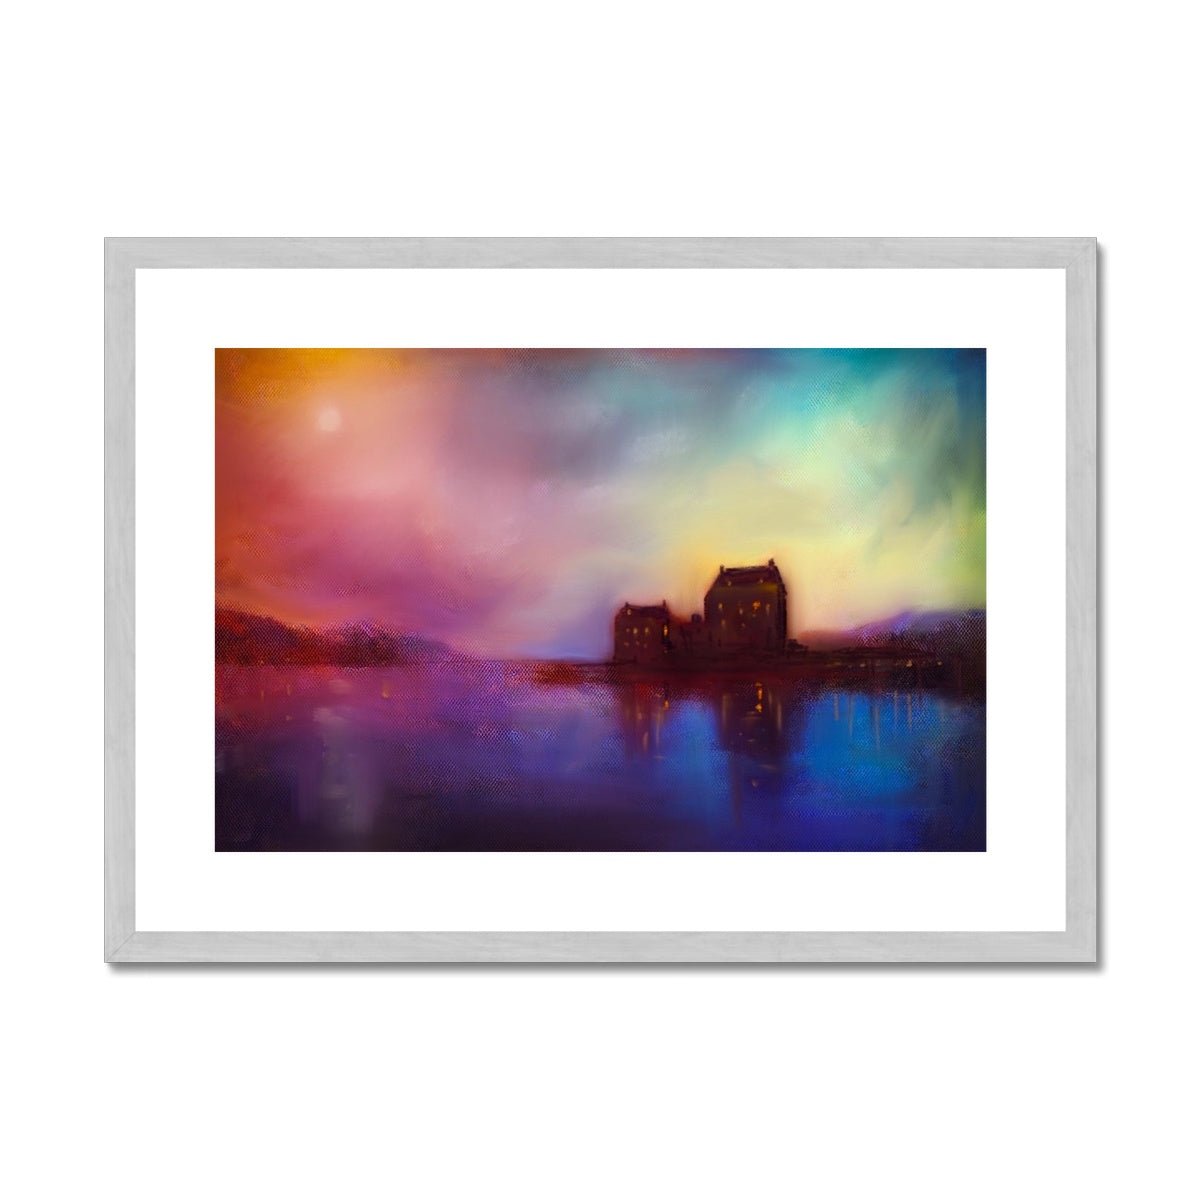 Eilean Donan Castle Sunset Painting | Antique Framed & Mounted Prints From Scotland-Antique Framed & Mounted Prints-Historic & Iconic Scotland Art Gallery-A2 Landscape-Silver Frame-Paintings, Prints, Homeware, Art Gifts From Scotland By Scottish Artist Kevin Hunter